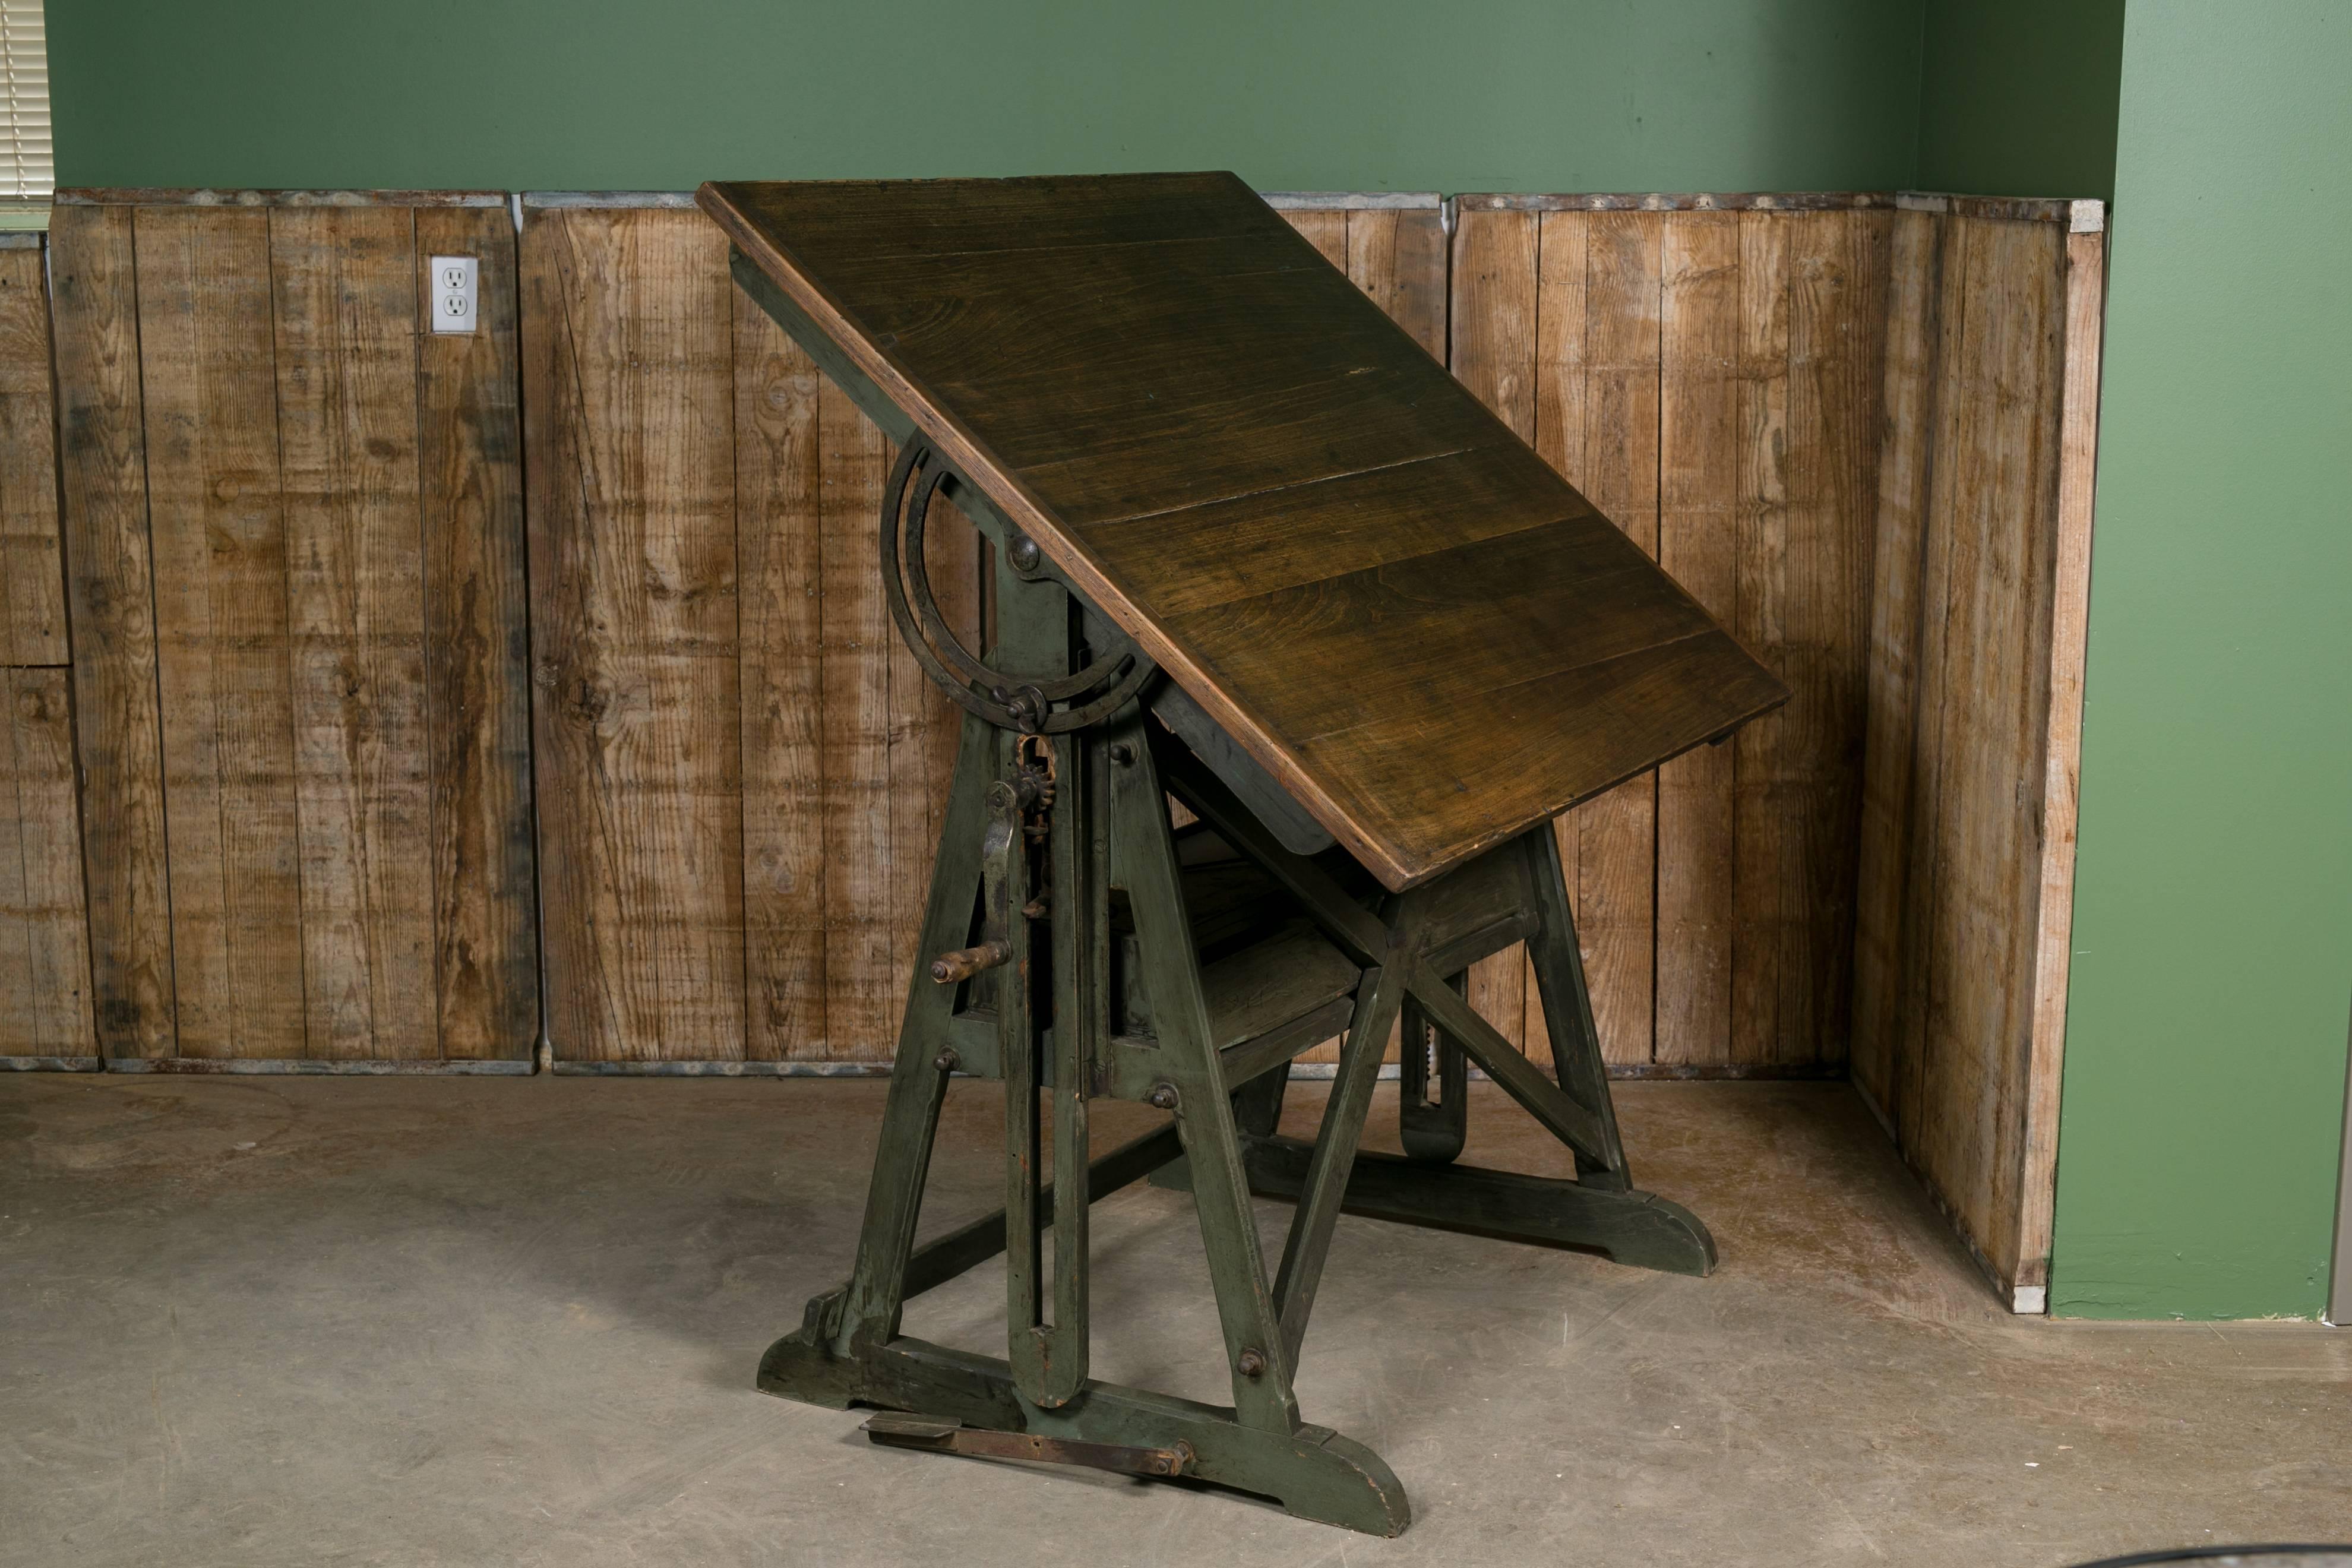 Beautiful Industrial drafting desk with dark wood top and green base from Belgium, circa 1900. Original wood top and green painted wood and iron base. Features a long drawer in the middle of the fixture for storage. Top tilts forward or can be